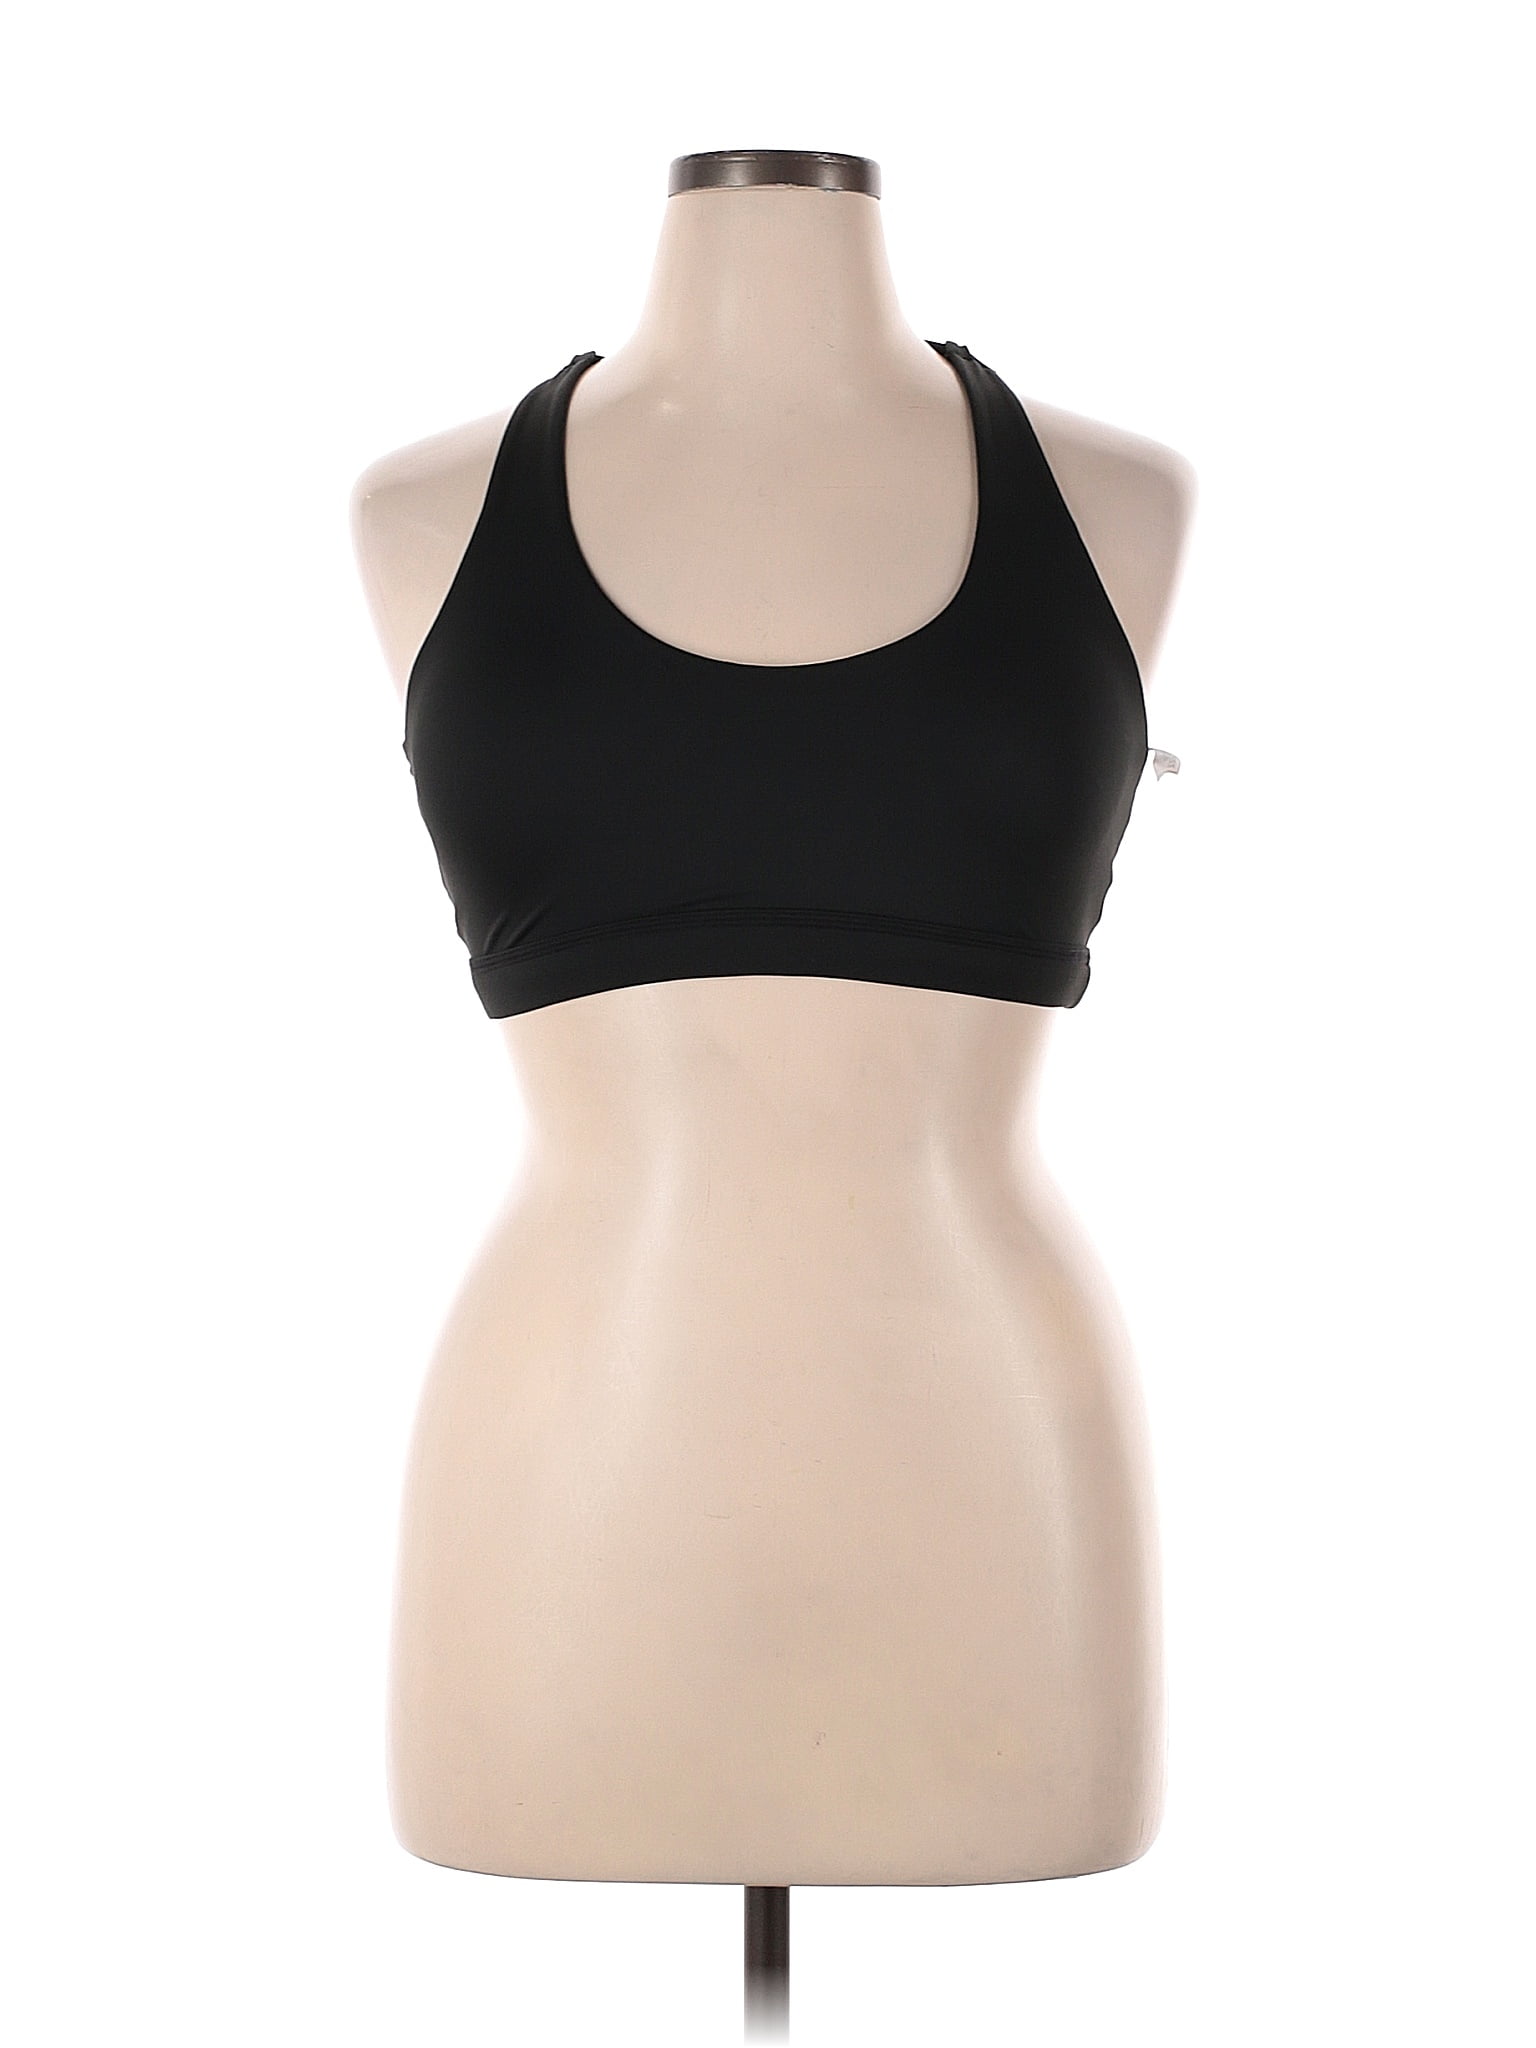 Cvg Sports Bra XL Constantly Varied Gear New Without Tags